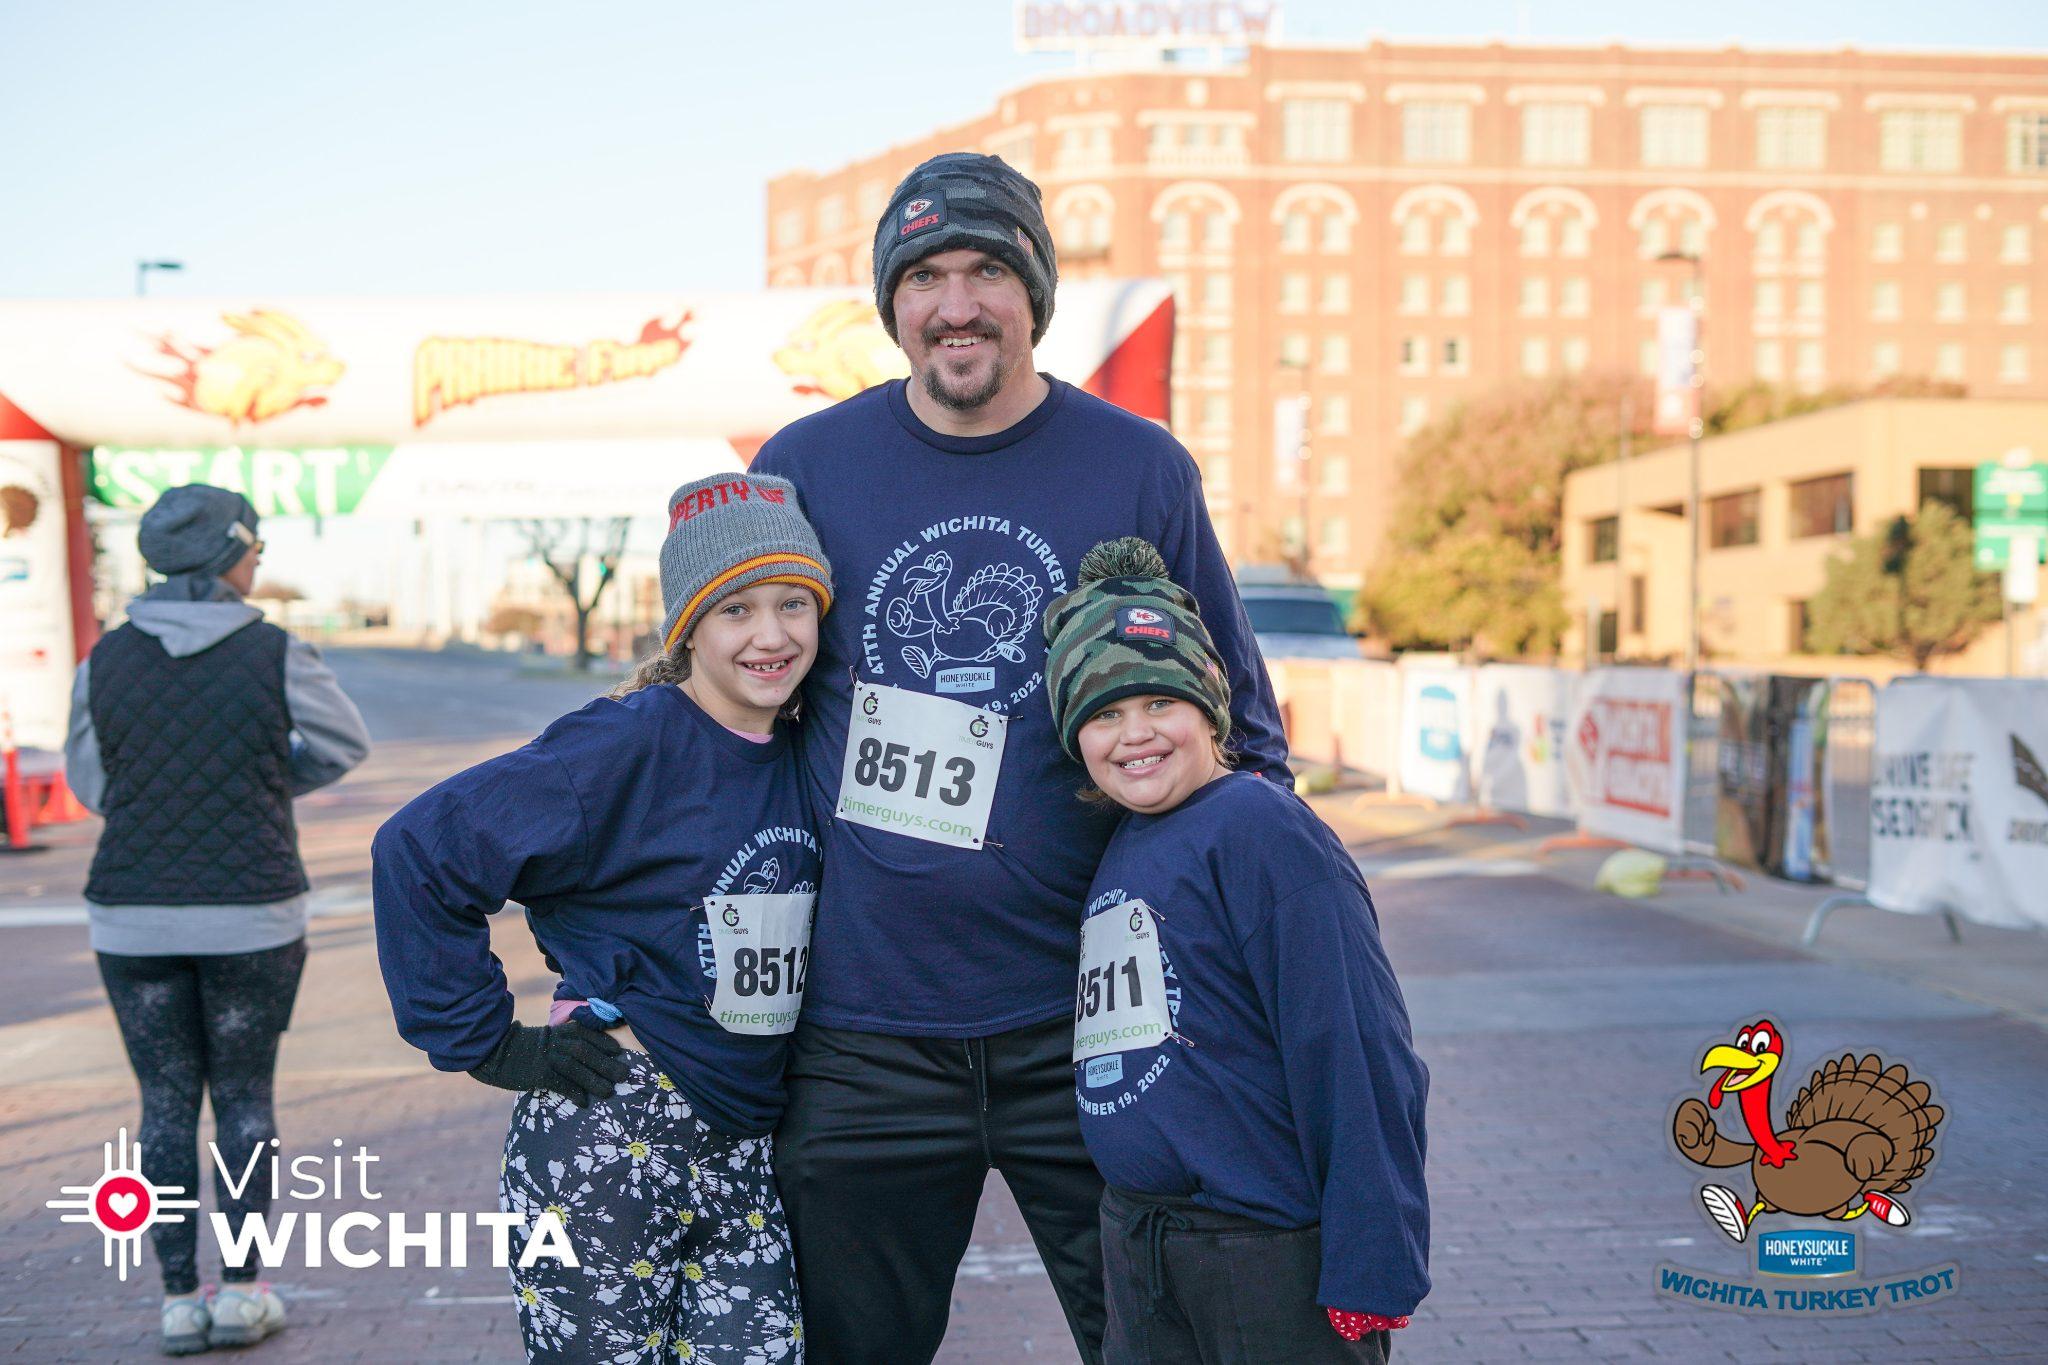 Register NOW for the 48th Annual Turkey Trot in Wichita